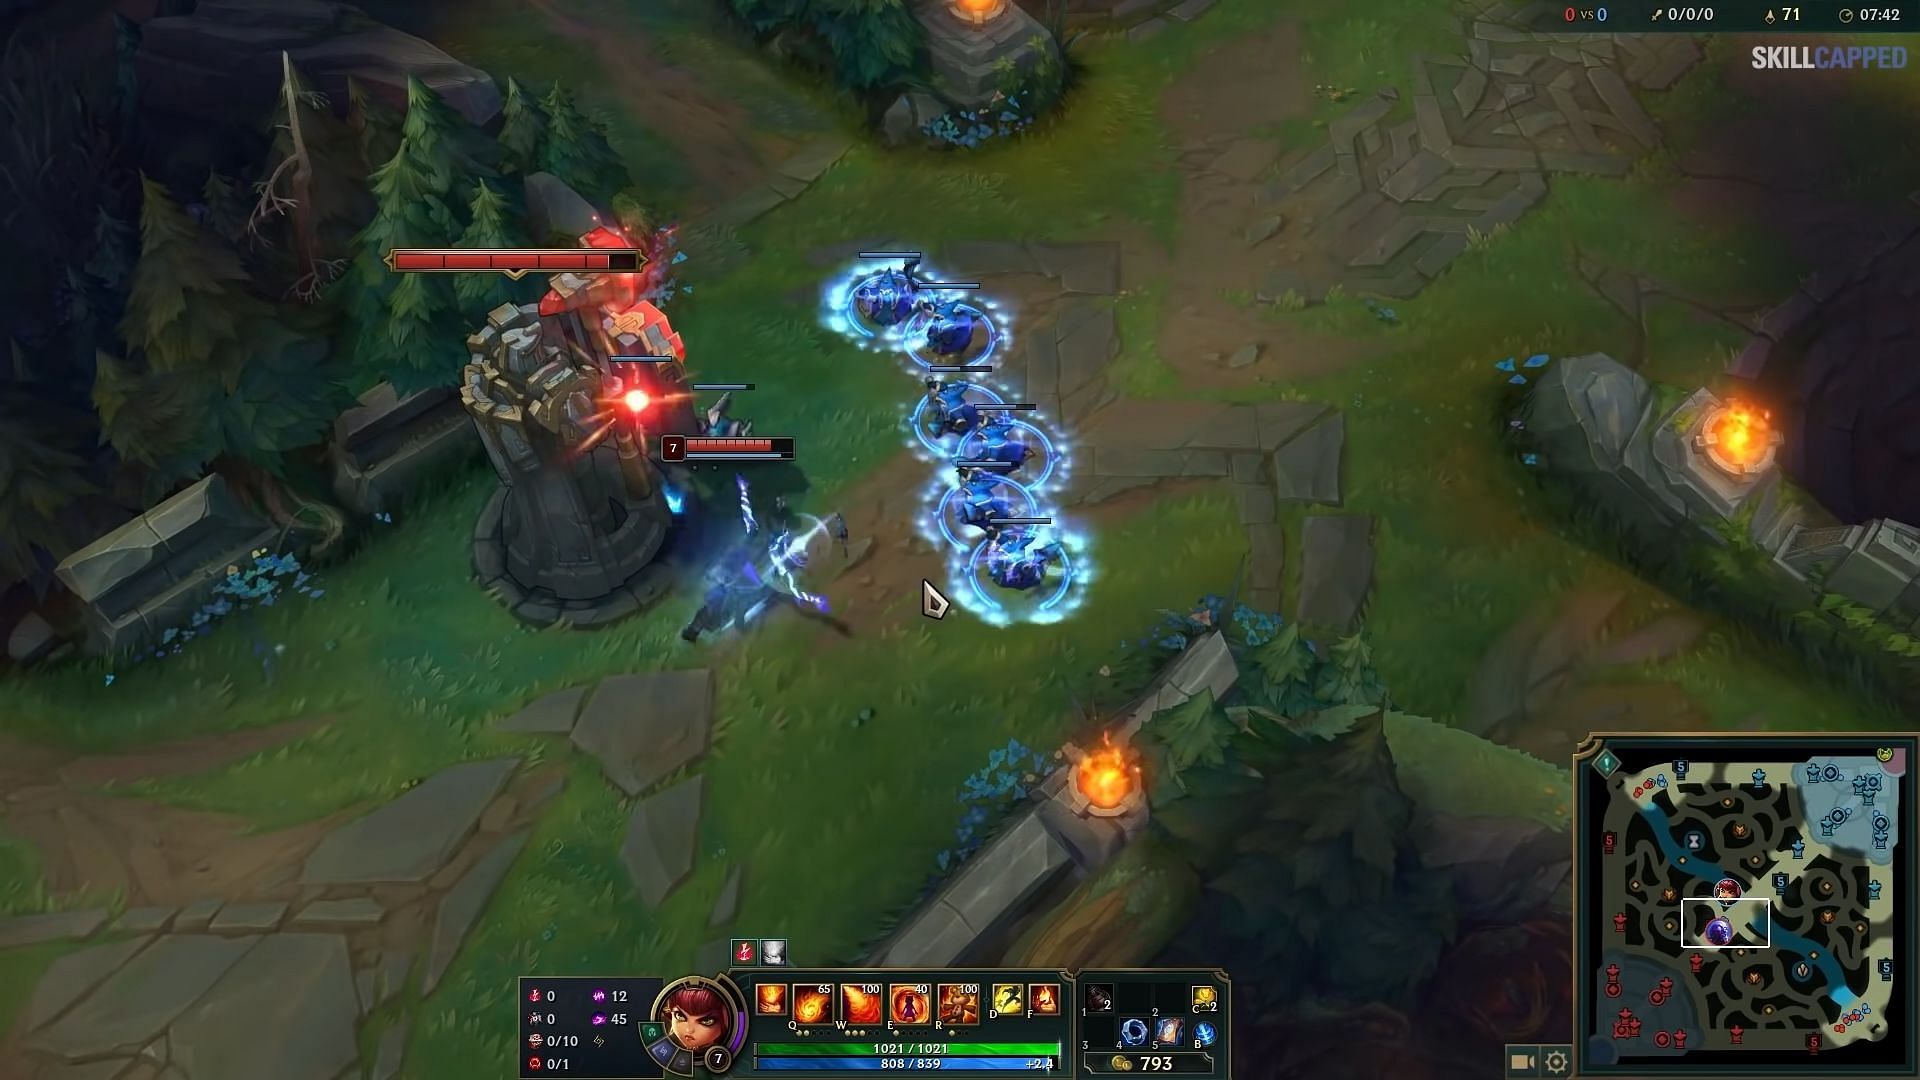 Wall-clipping bug is making waves in League of Legends